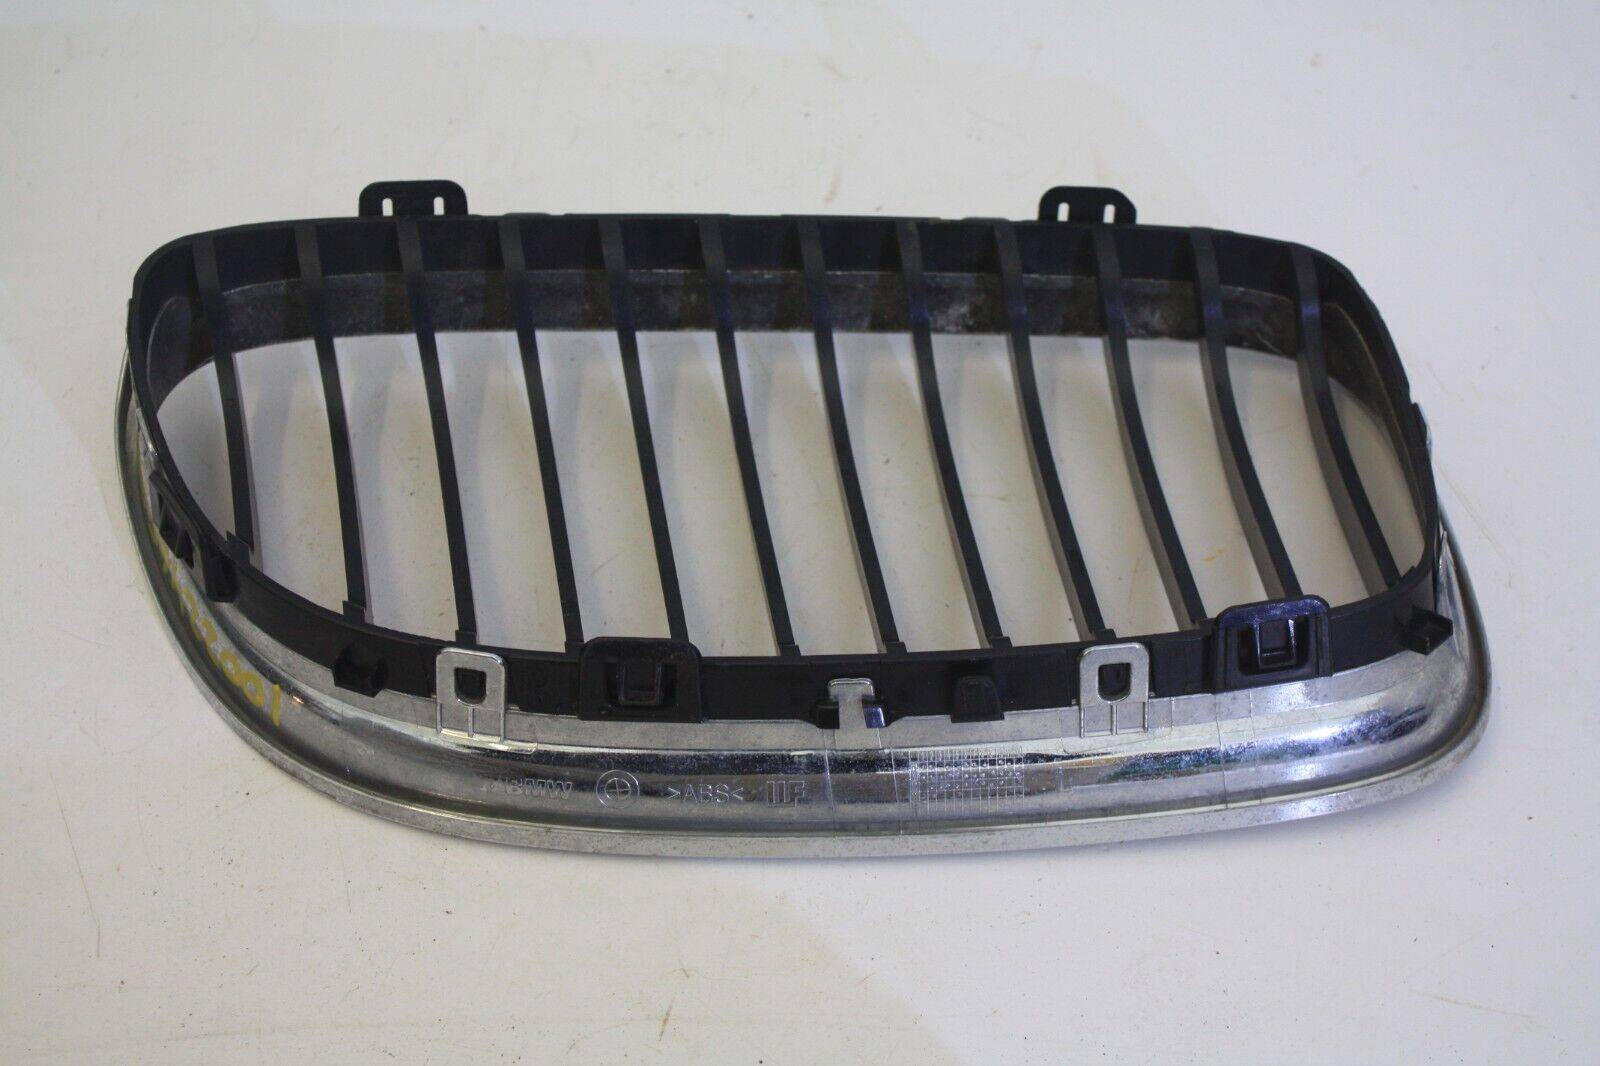 BMW-3-Series-E90-LCI-Front-Bumper-Left-Kidney-Grill-2008-TO-2012-51137201967-176234542894-6